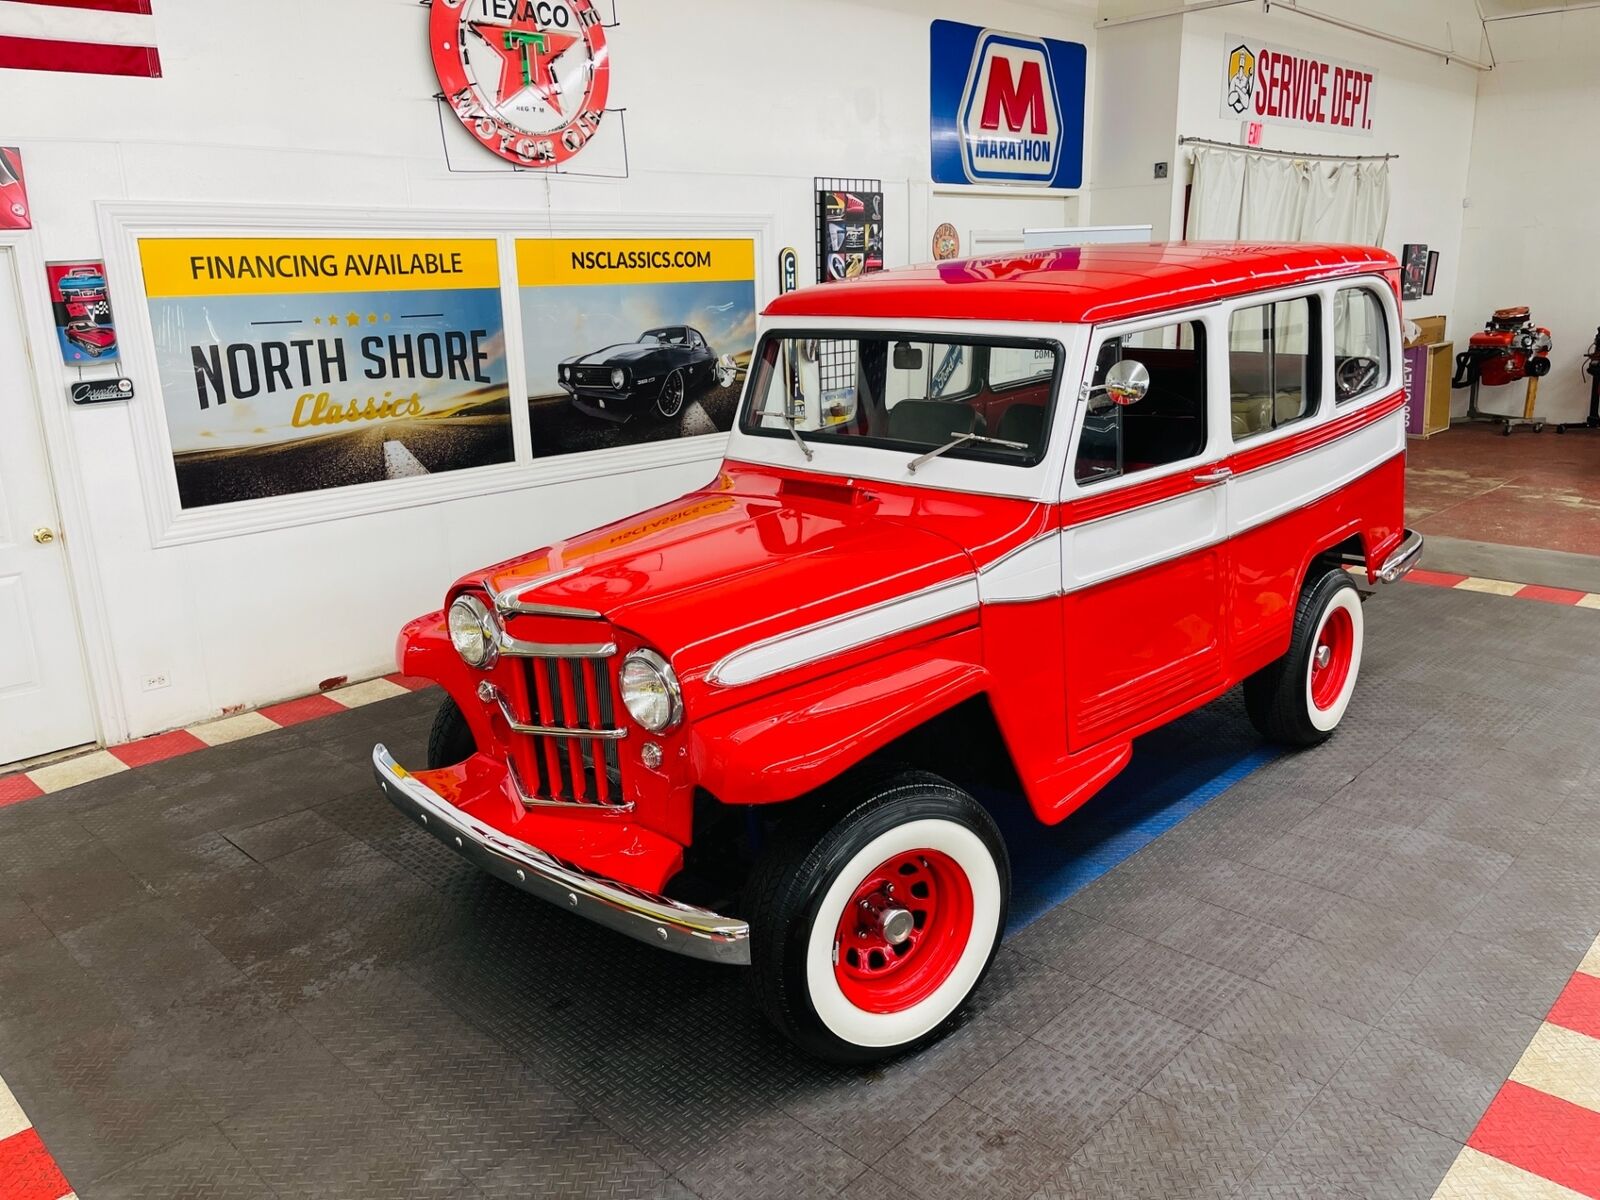 1961 Willys Jeep Wagon - See Video - Willys Jeep Wagon Red With 0 Miles, For Sale!